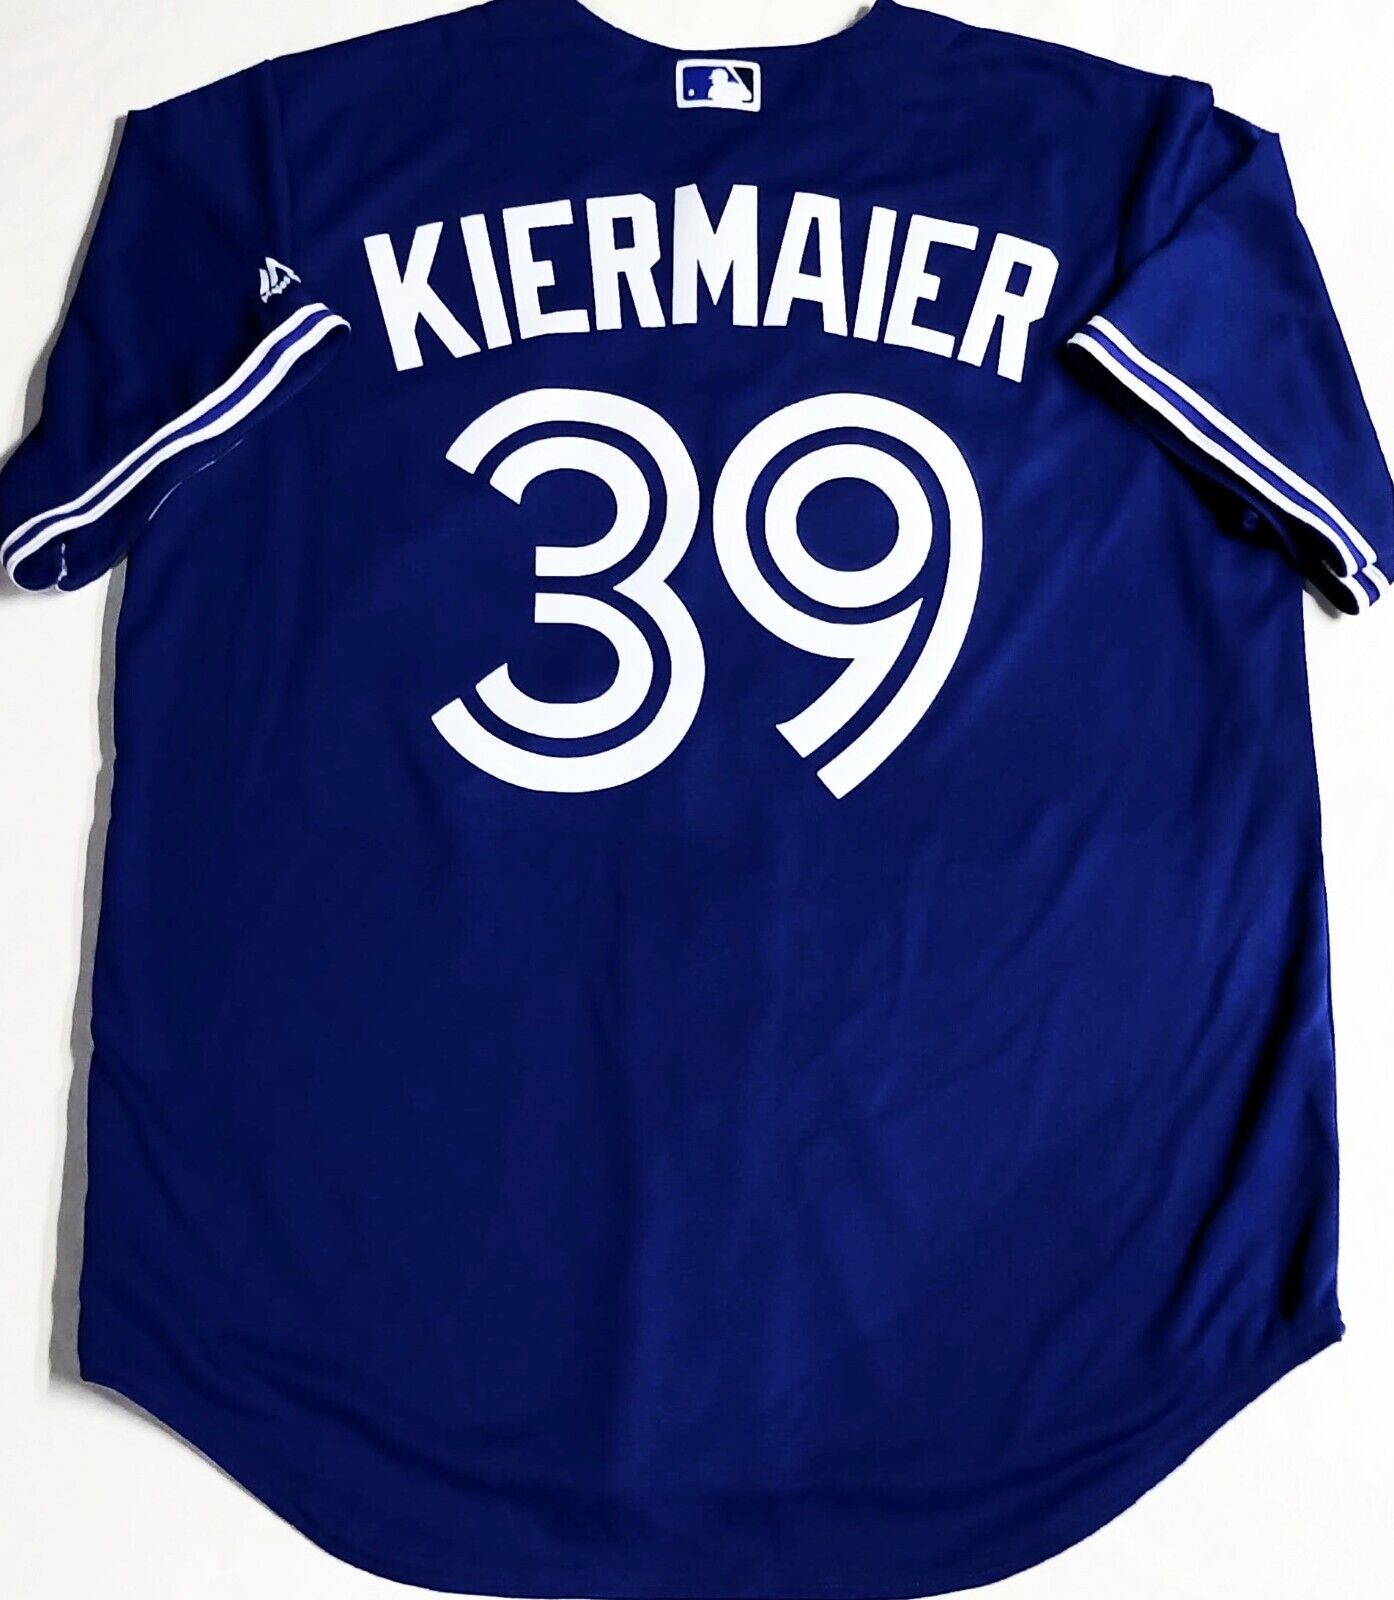 The JaysShop at the Dome has Kiermaier jerseys ready made for sale.  Interesting move for a player on a one year contract. I thought they'd be  pushing Varsho in marketing efforts. Can't